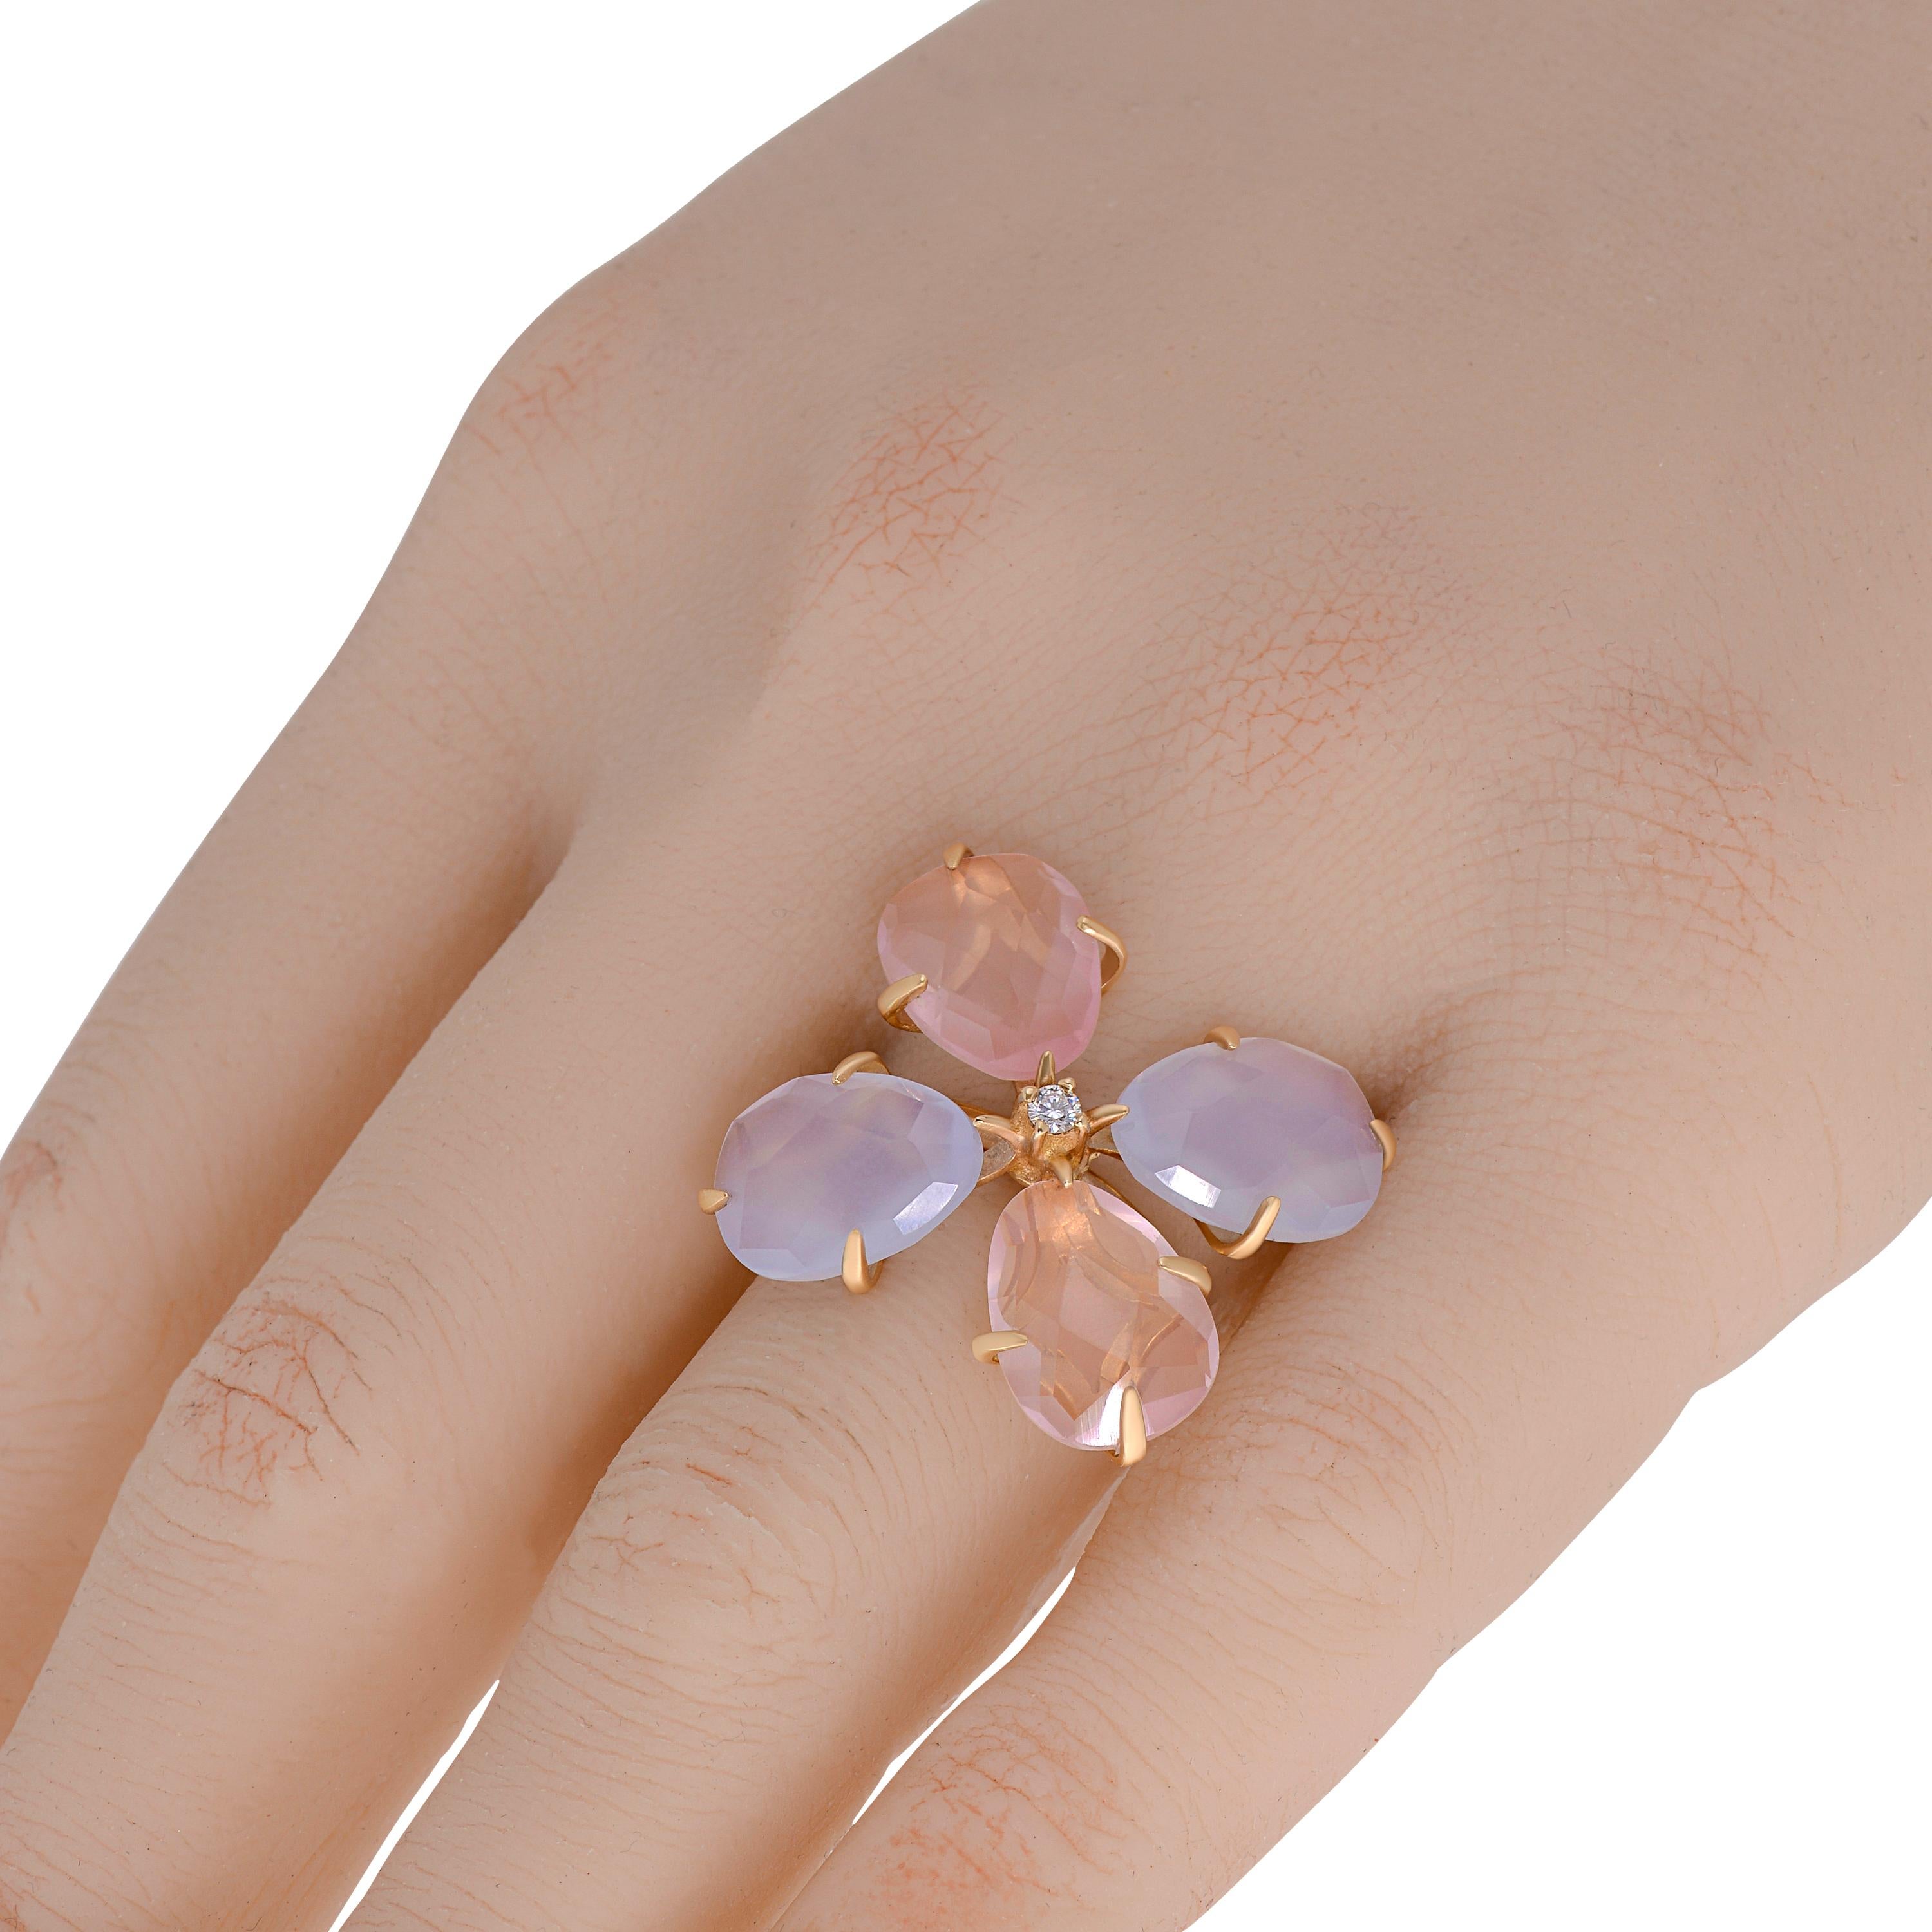 This bejeweled Mimi Milano 18K rose gold statement ring features a glittering 0.04ct. tw. diamond accent with faceted chalcedony and rose quartz petals. Semi-precious weight is 12 ct. tw. . The ring size is 6.55. The decoration size is 7/8